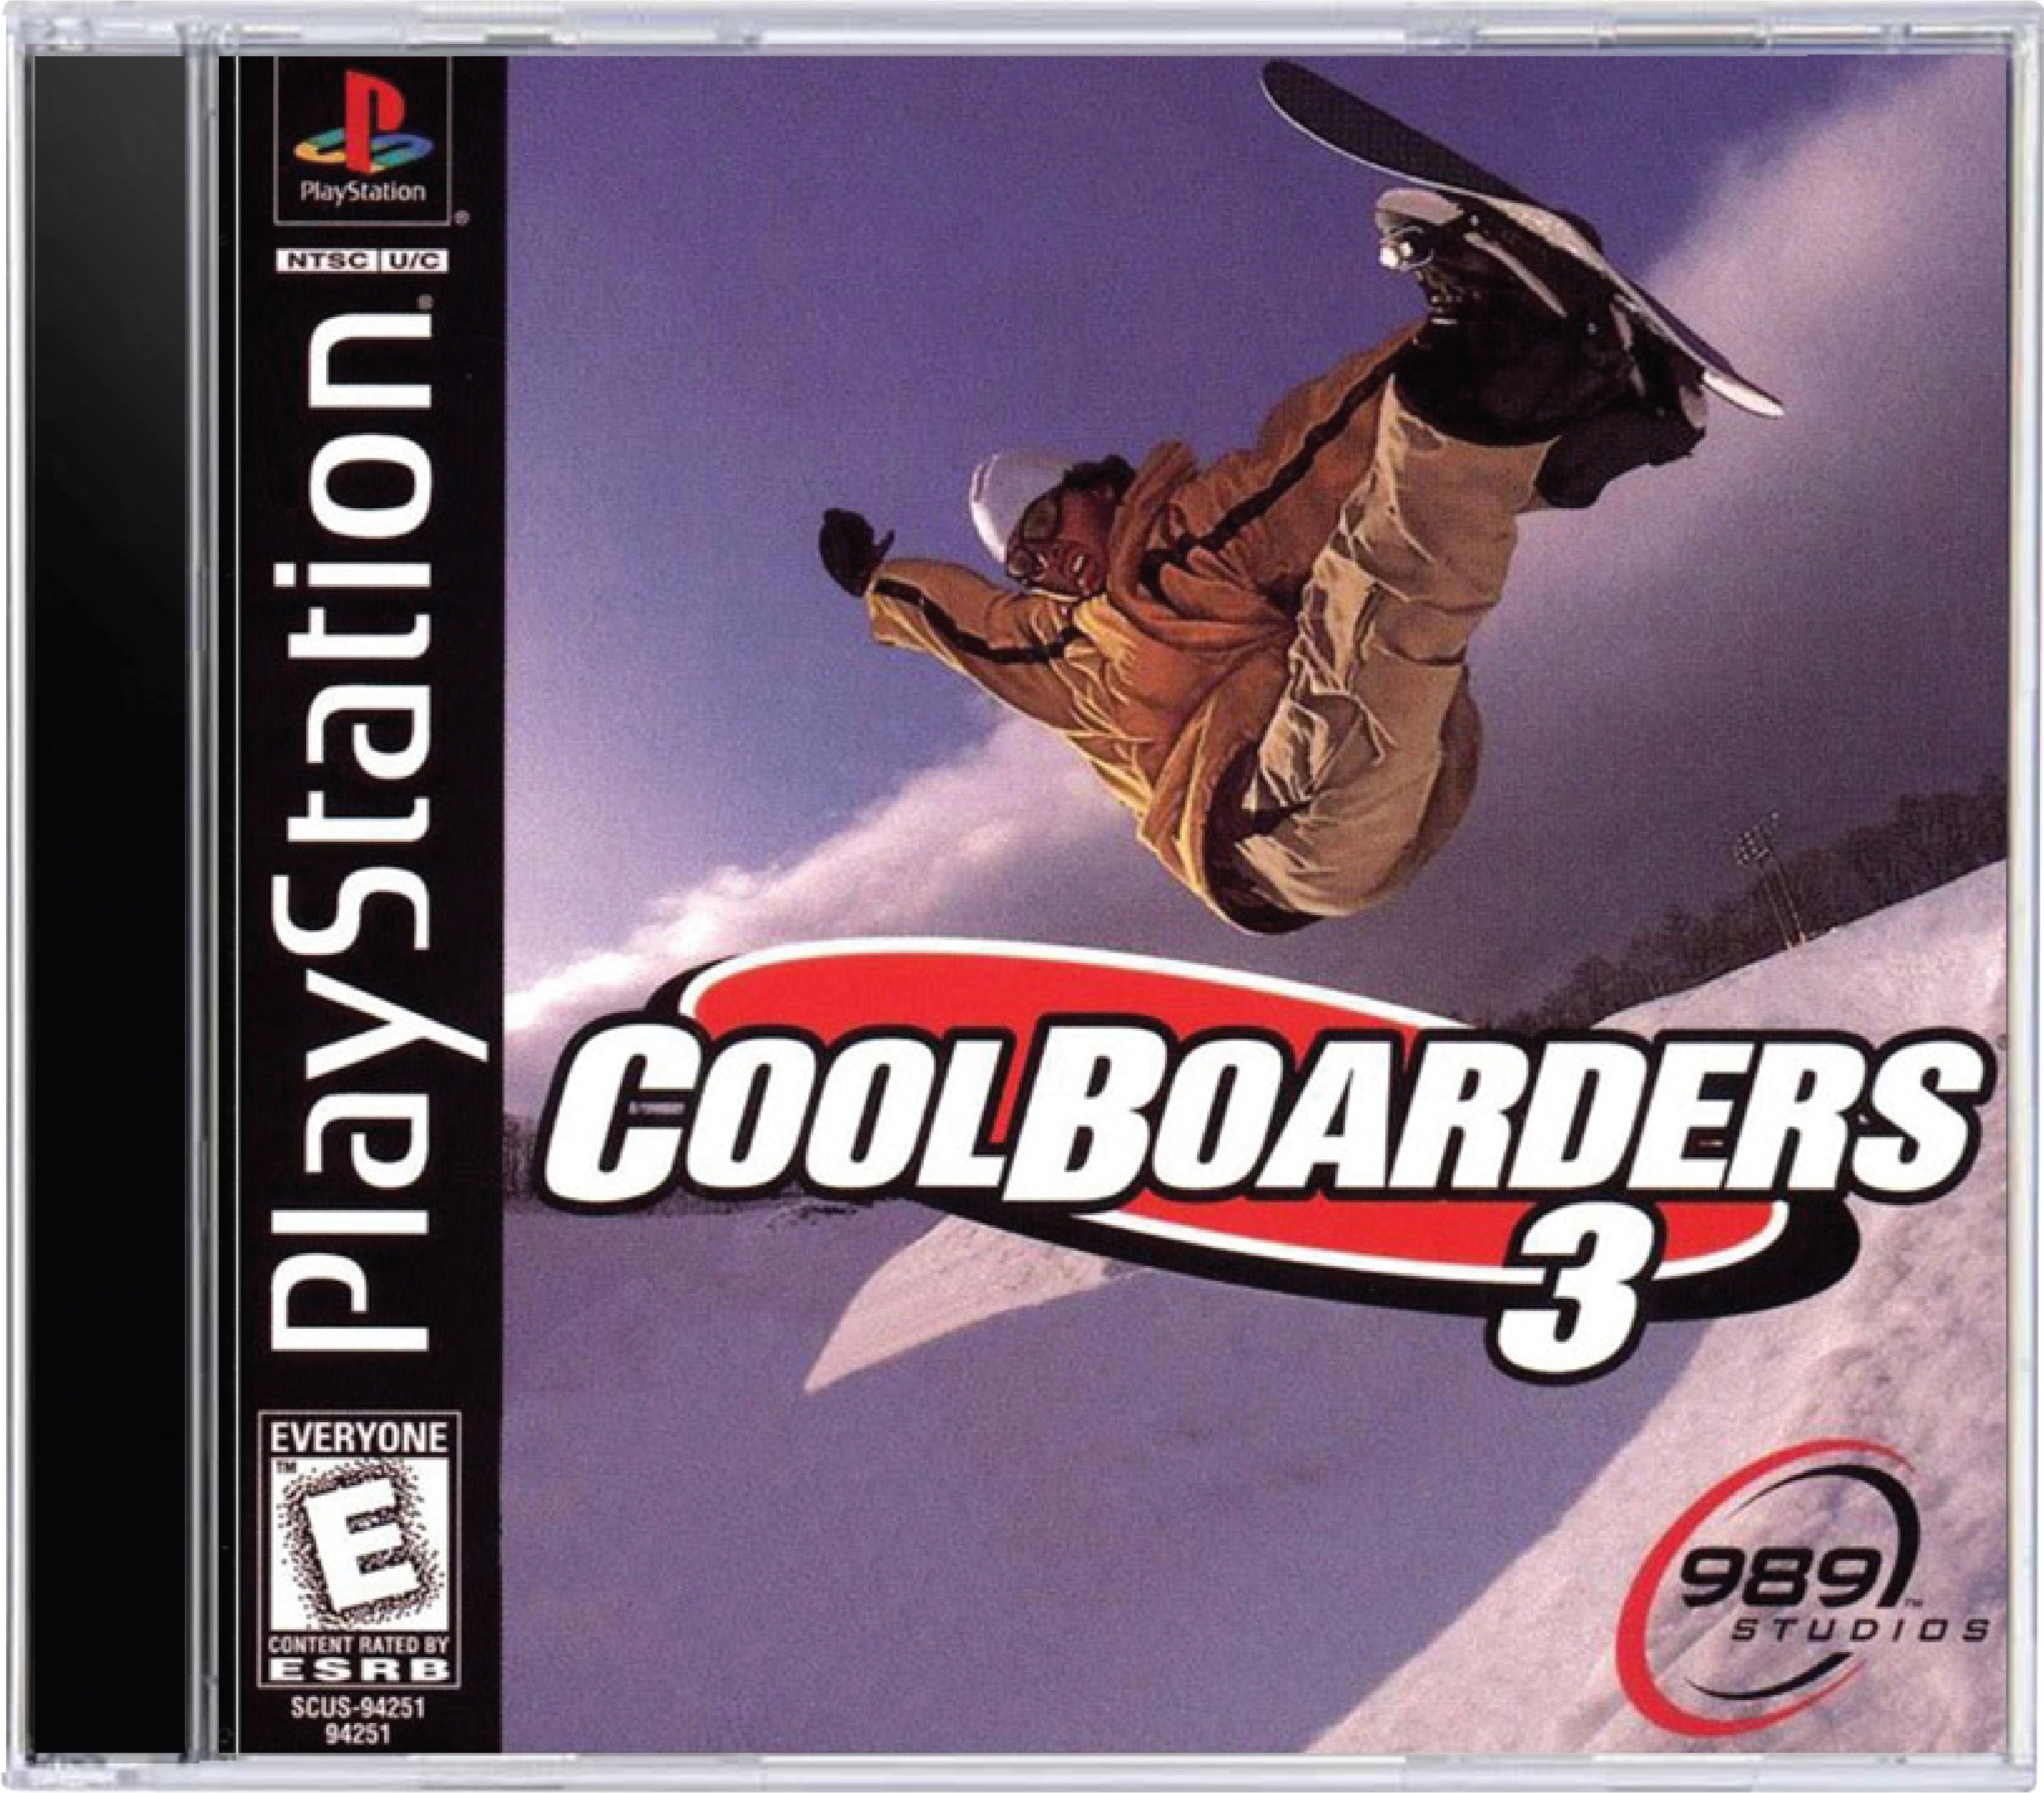 Cool Boarders 3 Cover Art and Product Photo